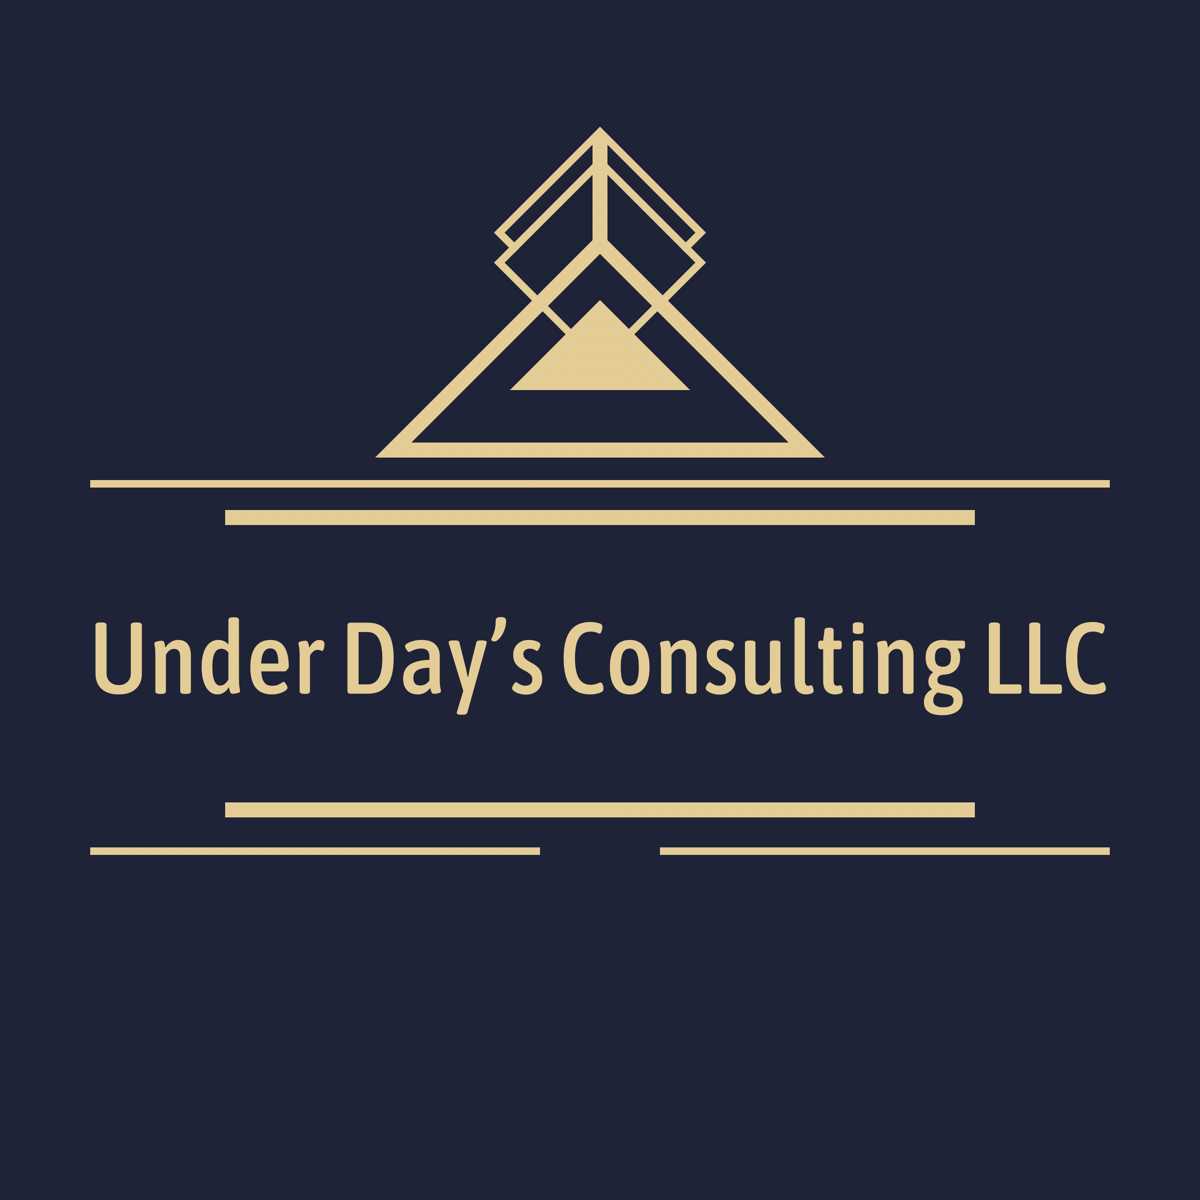 Under Day's Consulting's Logo